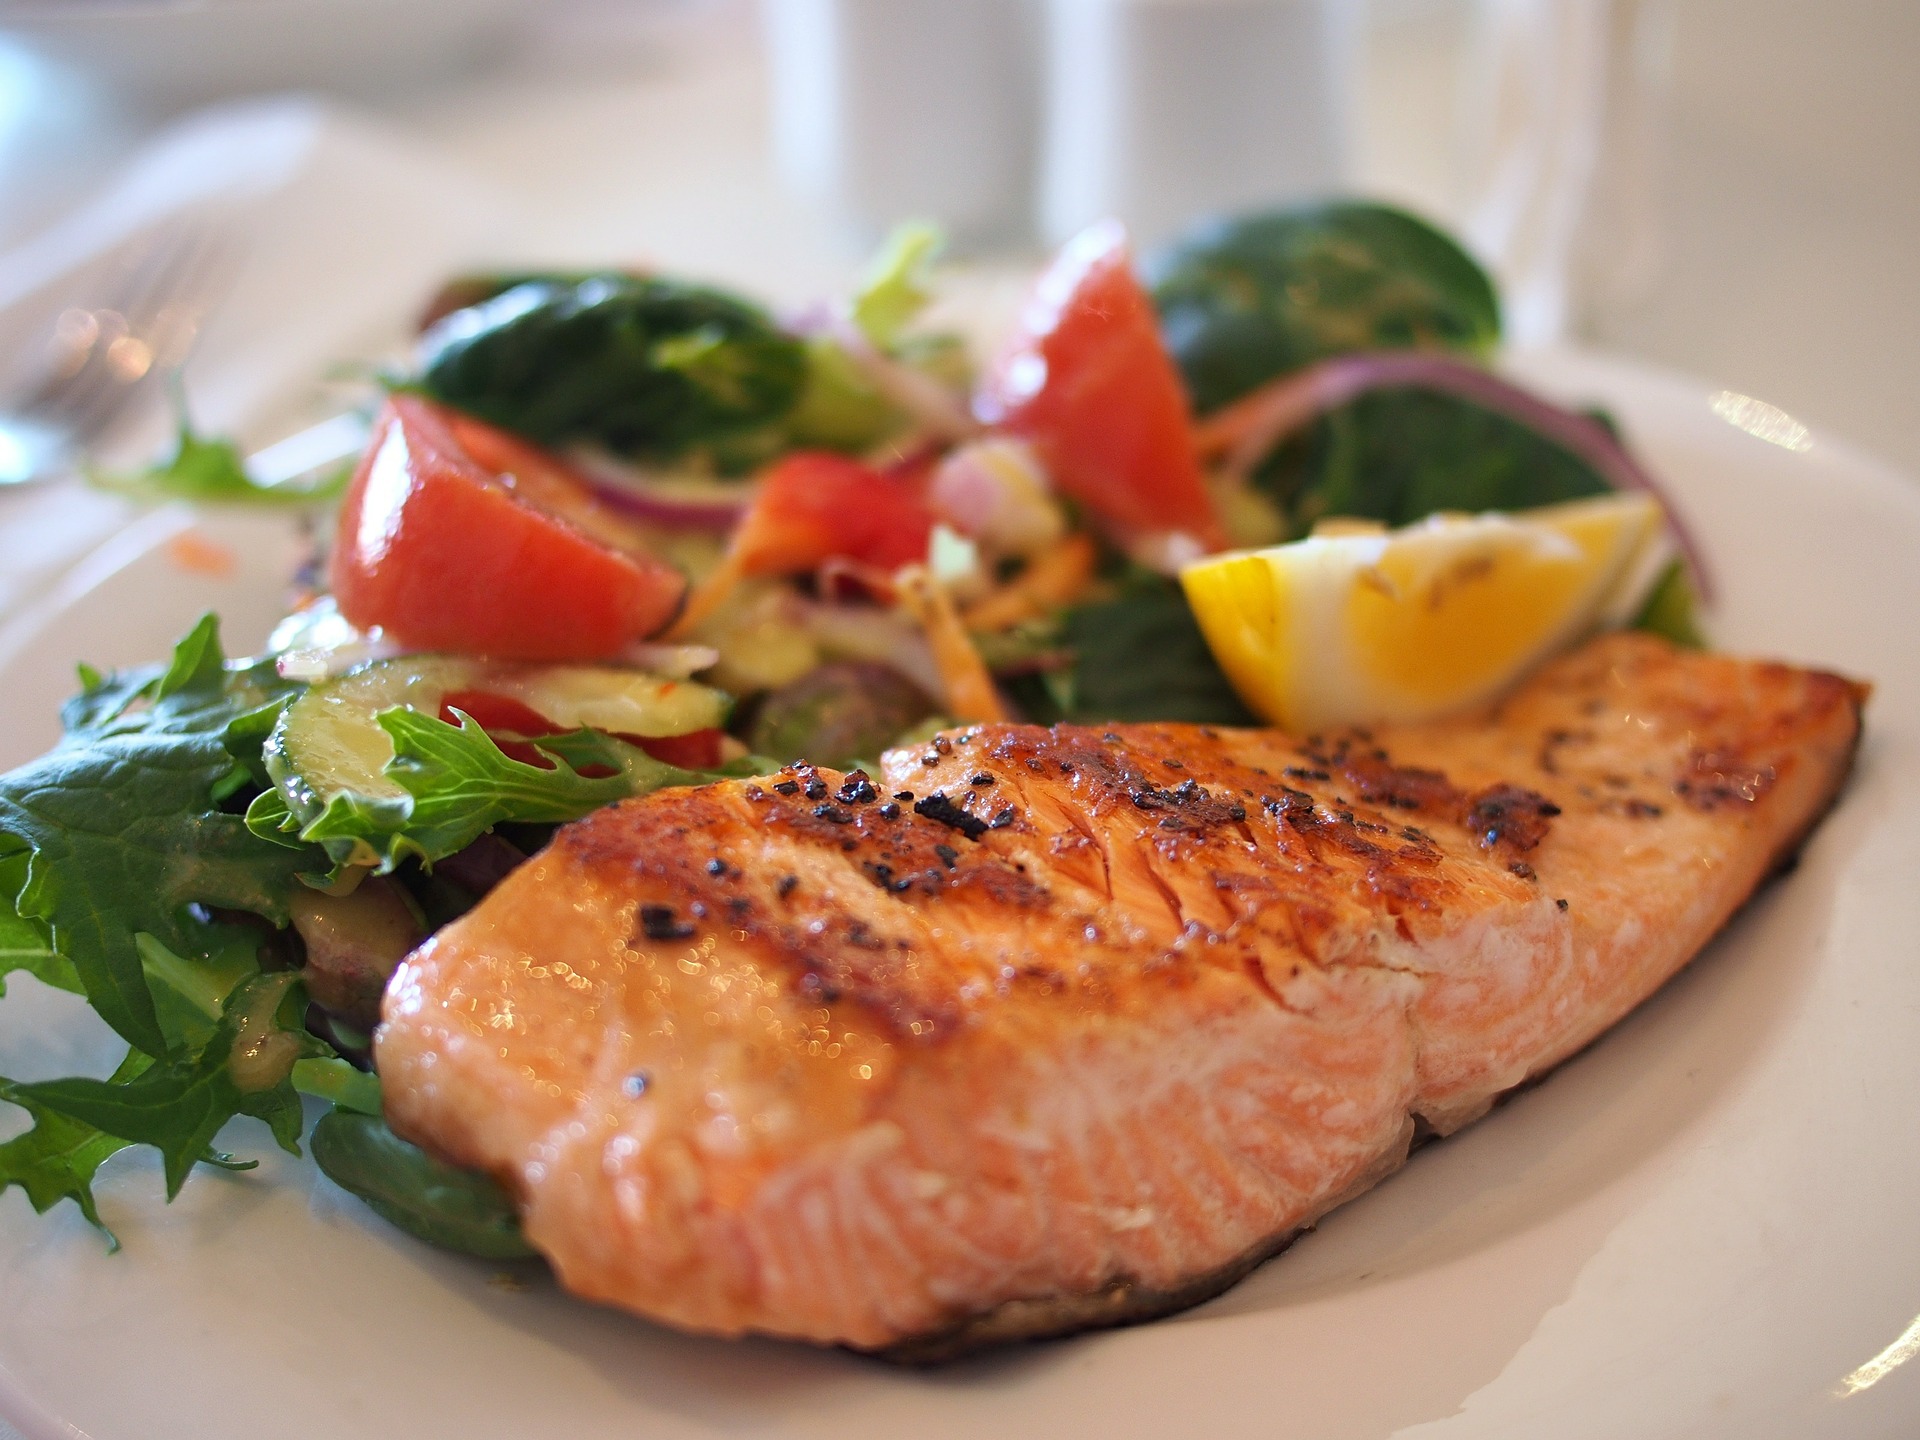 Salmon as a mood boosting food for Wellspace healthy work blog